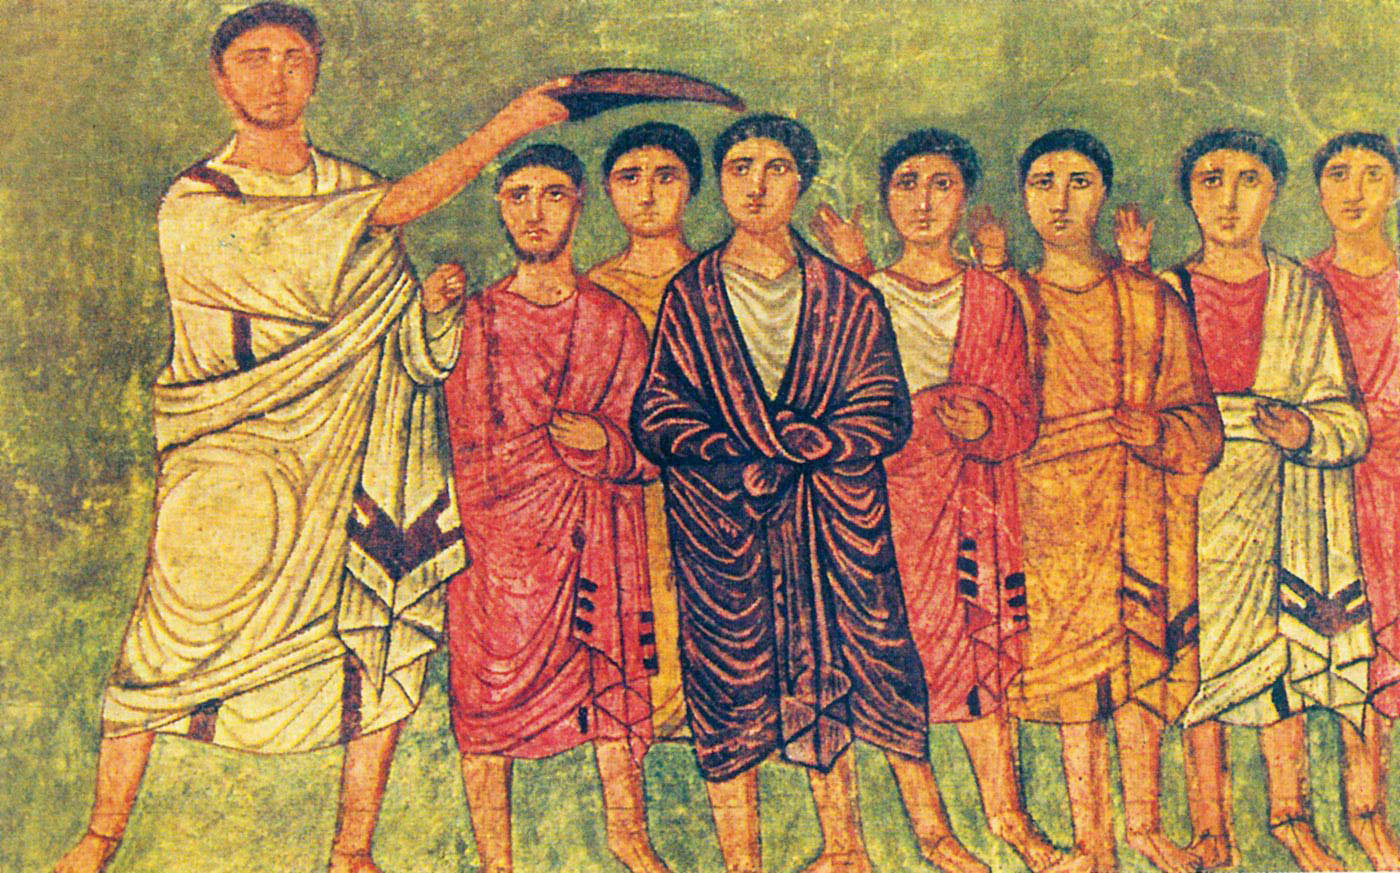 David, center wearing purple, is anointed king by Samuel. Image from the Dura Europos Synagogue, Syria, 3rd century AD. Image courtesy of Creative Commons